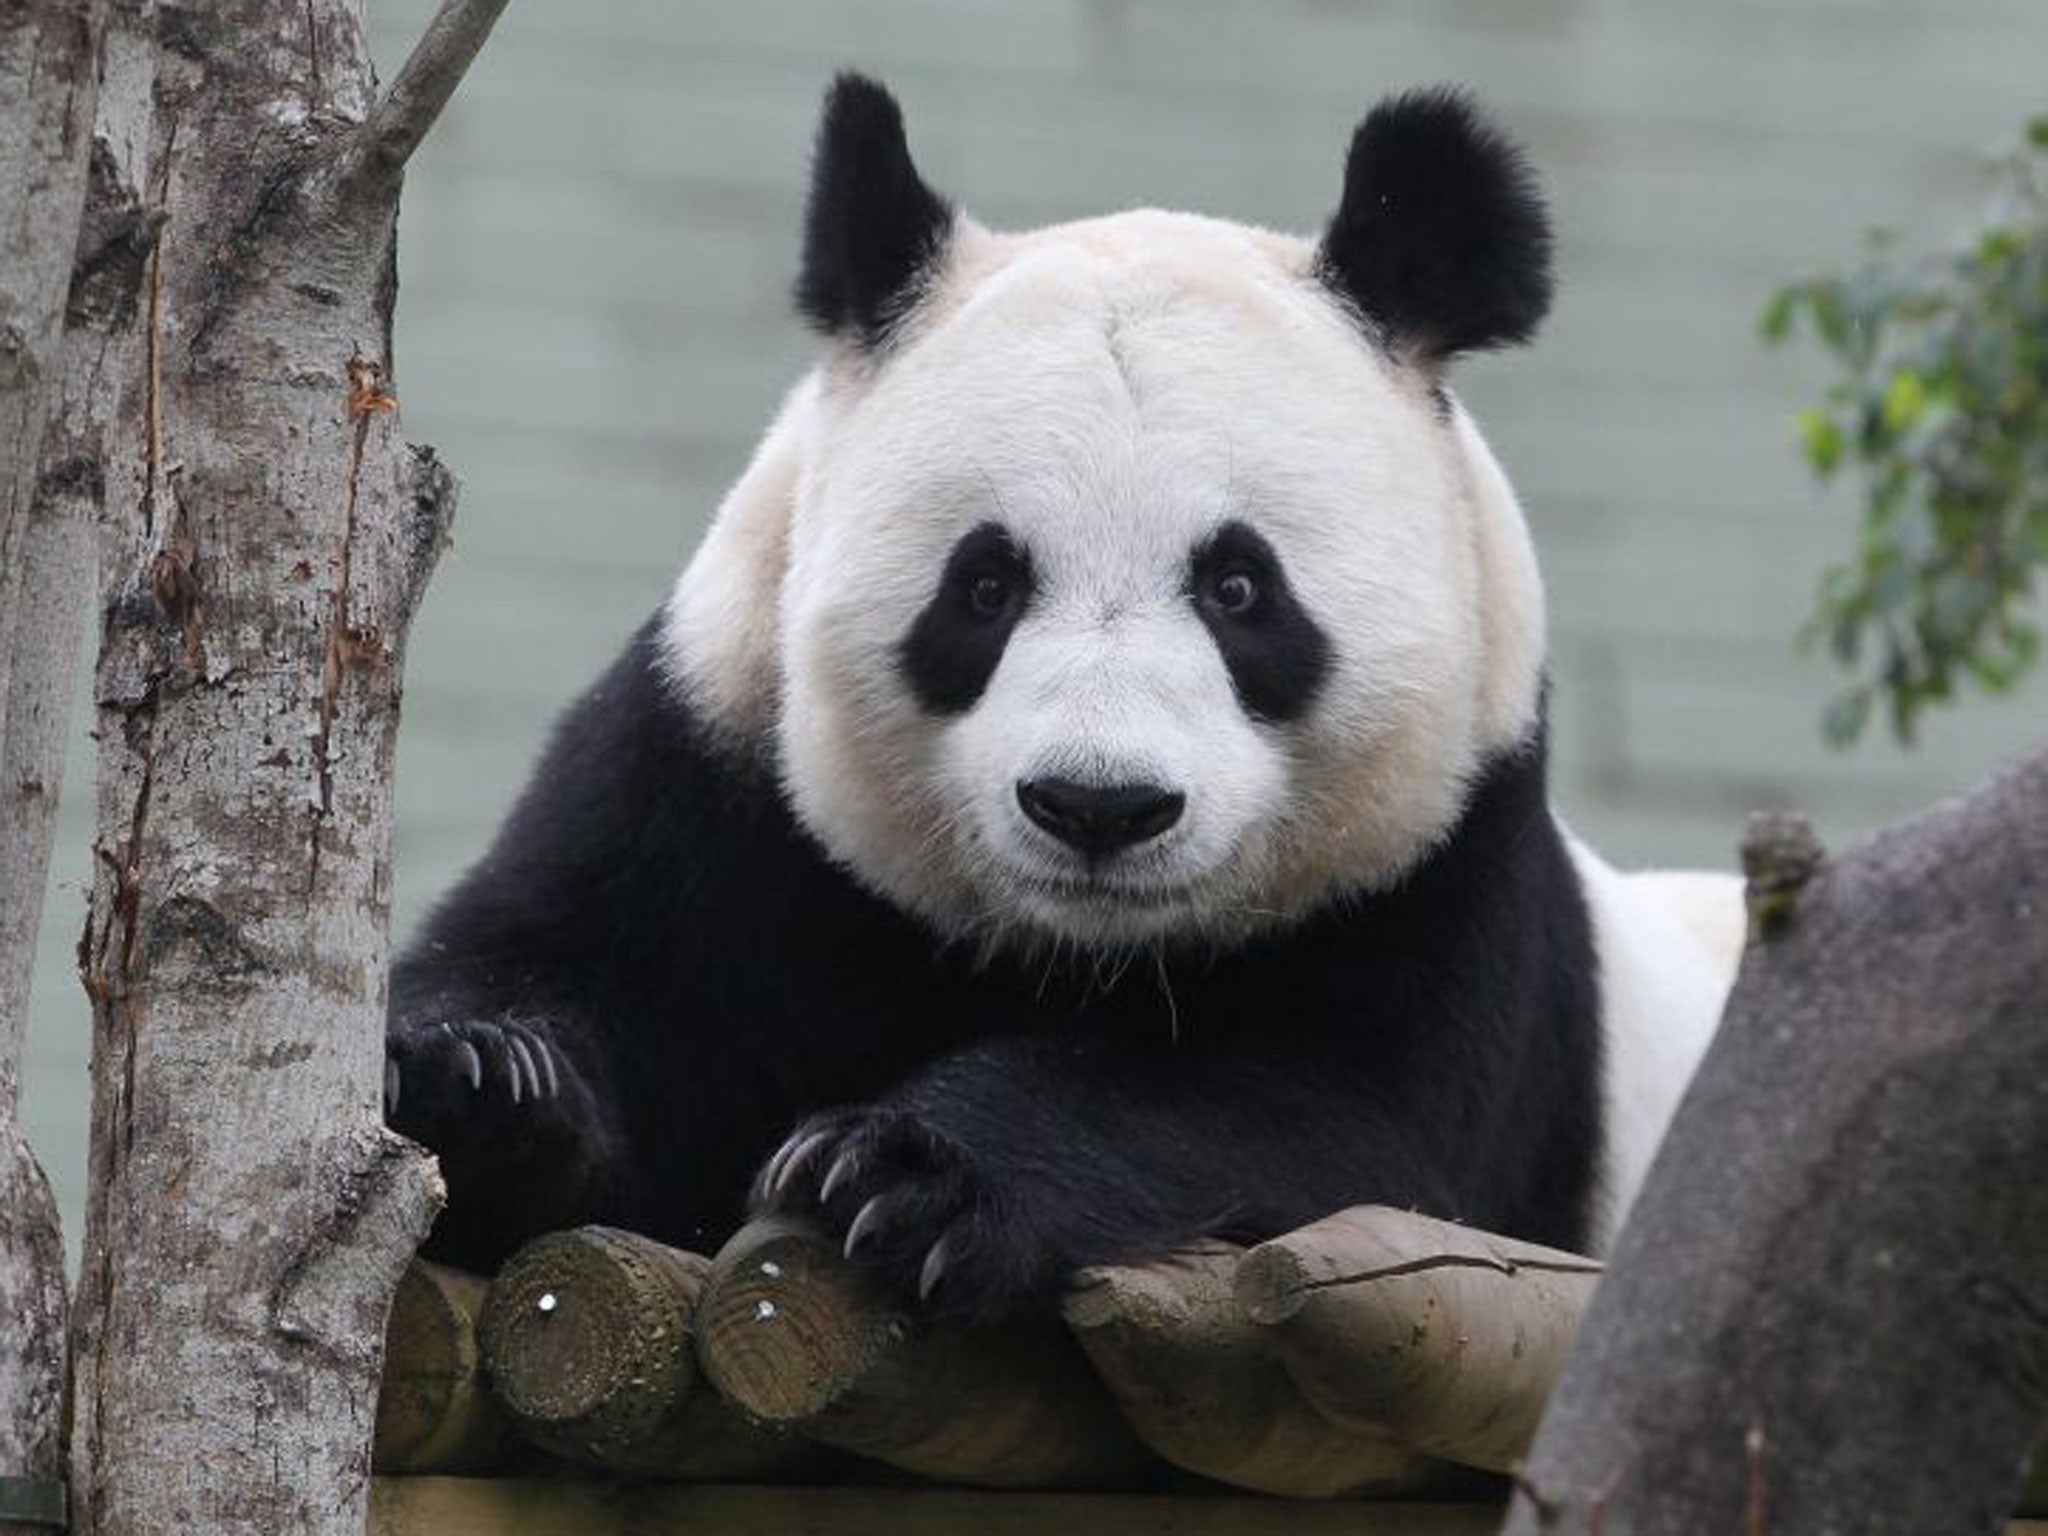 Natural mating was not attempted between Tian Tian, pictured, and male Yang Guang (Sunshine) as scientists who have been monitoring them at Edinburgh Zoo decided that Tian Tian was showing signs that were not "conducive to mating".